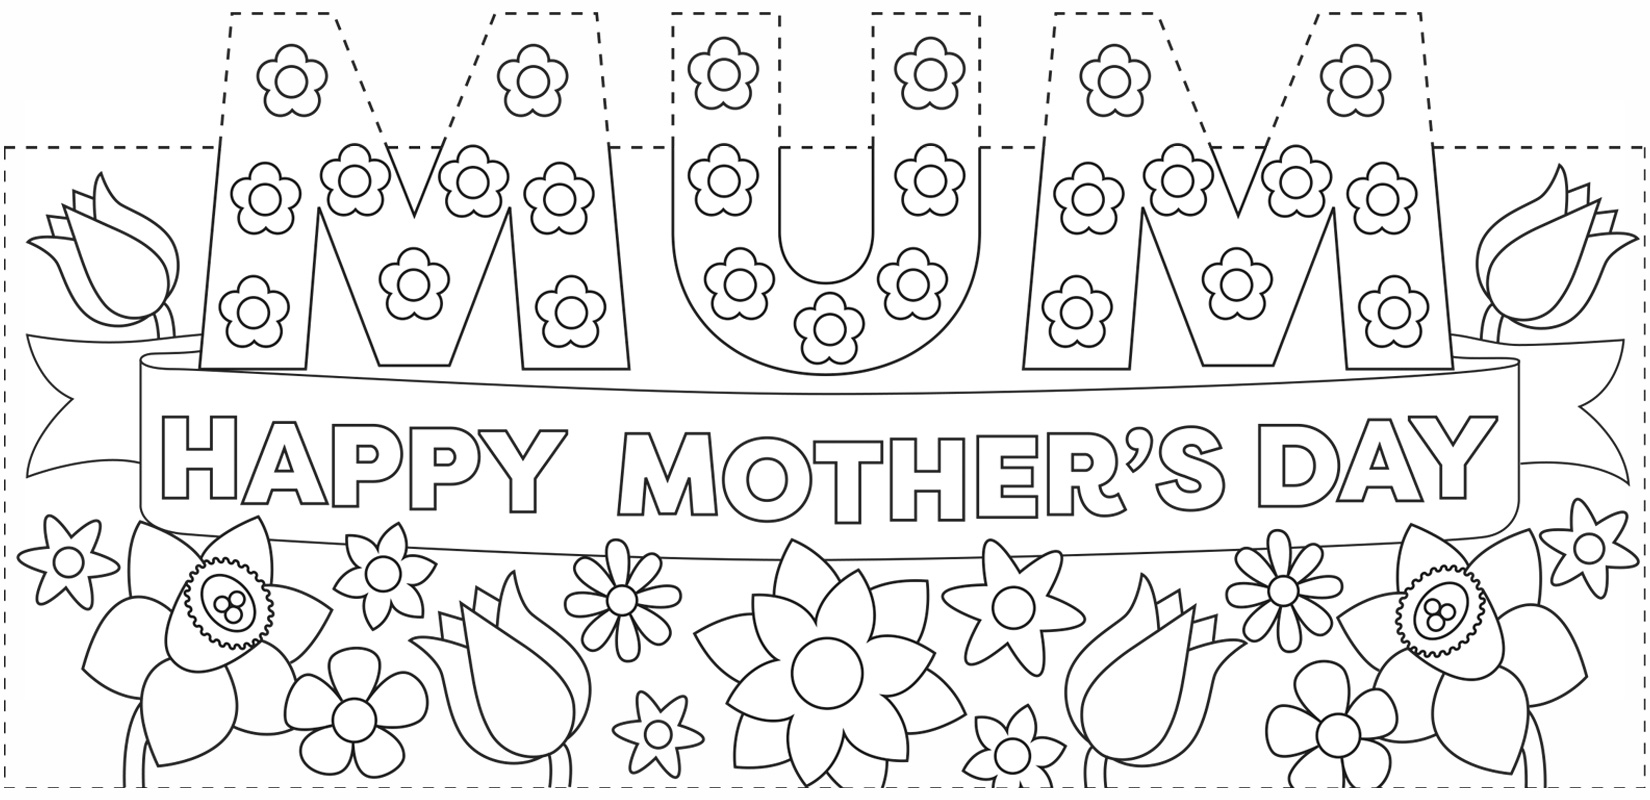 Make a Mother's Day Card